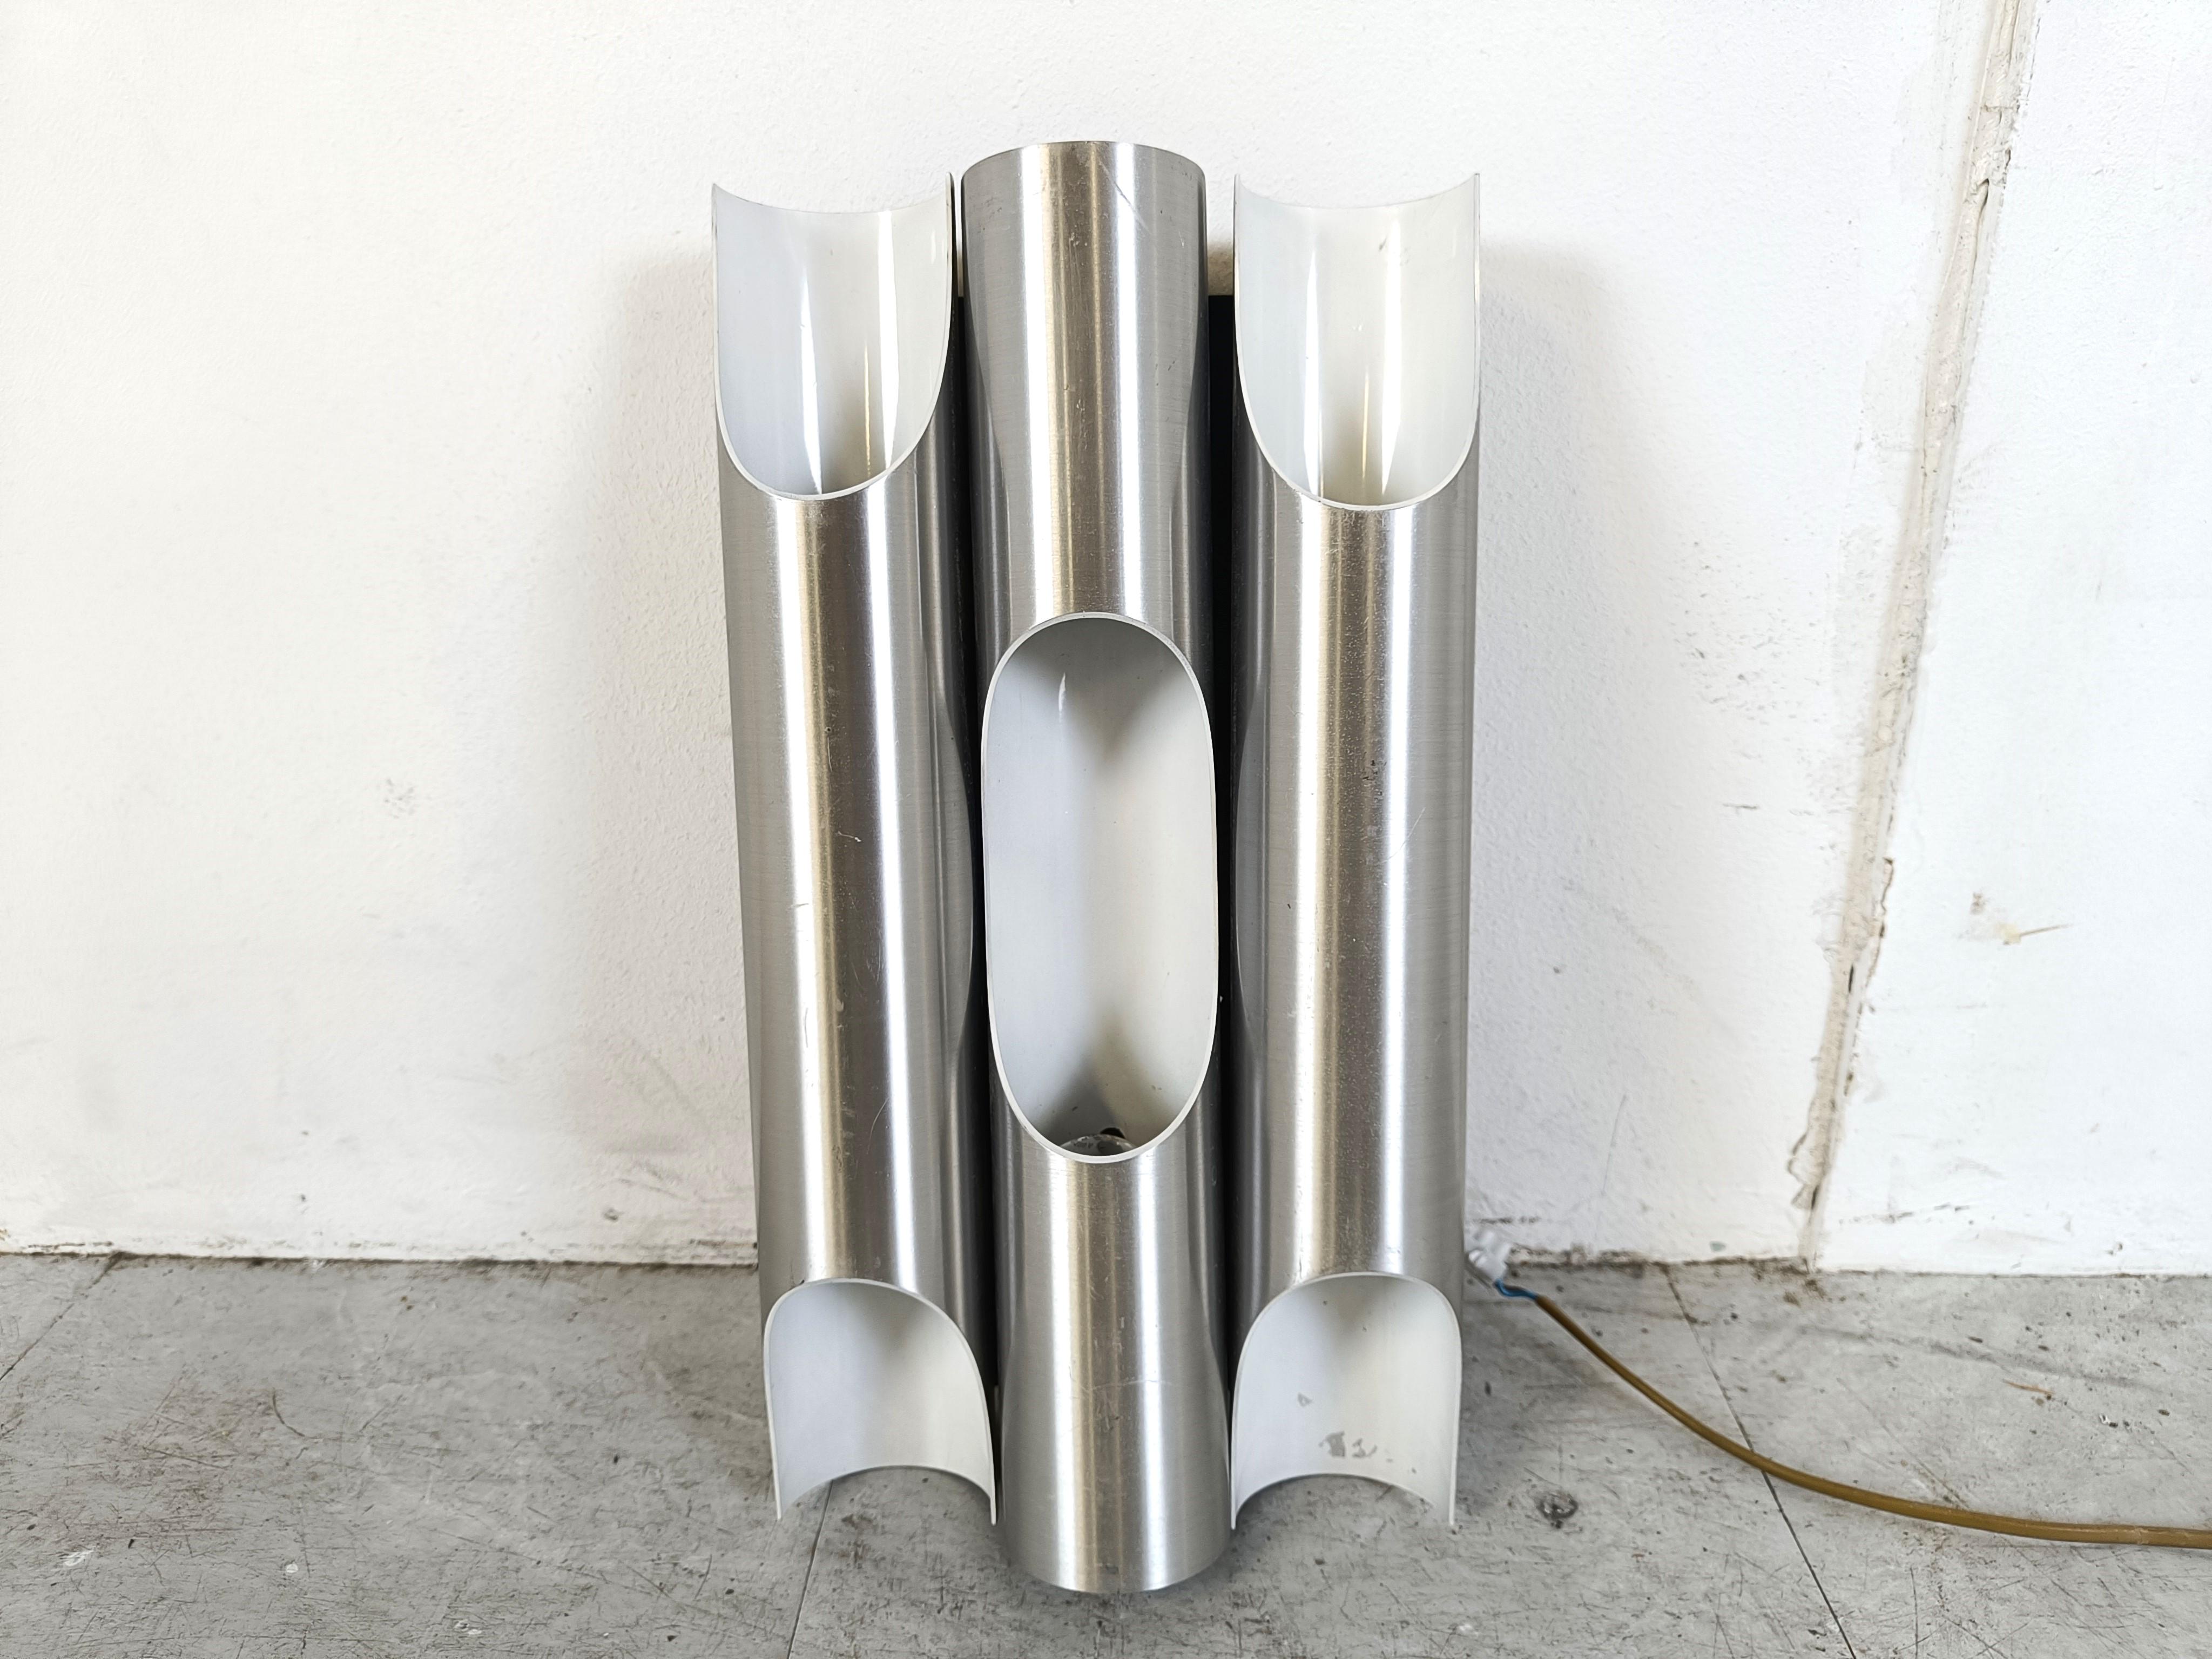 These Fuga wall lamps from Raak were designed by the architect and industrial designer Maija Liisa Komulainen in Finland in 1964. 

The design shows similarities with organ pipes. 

This lamps give indirect light.

1960s - The